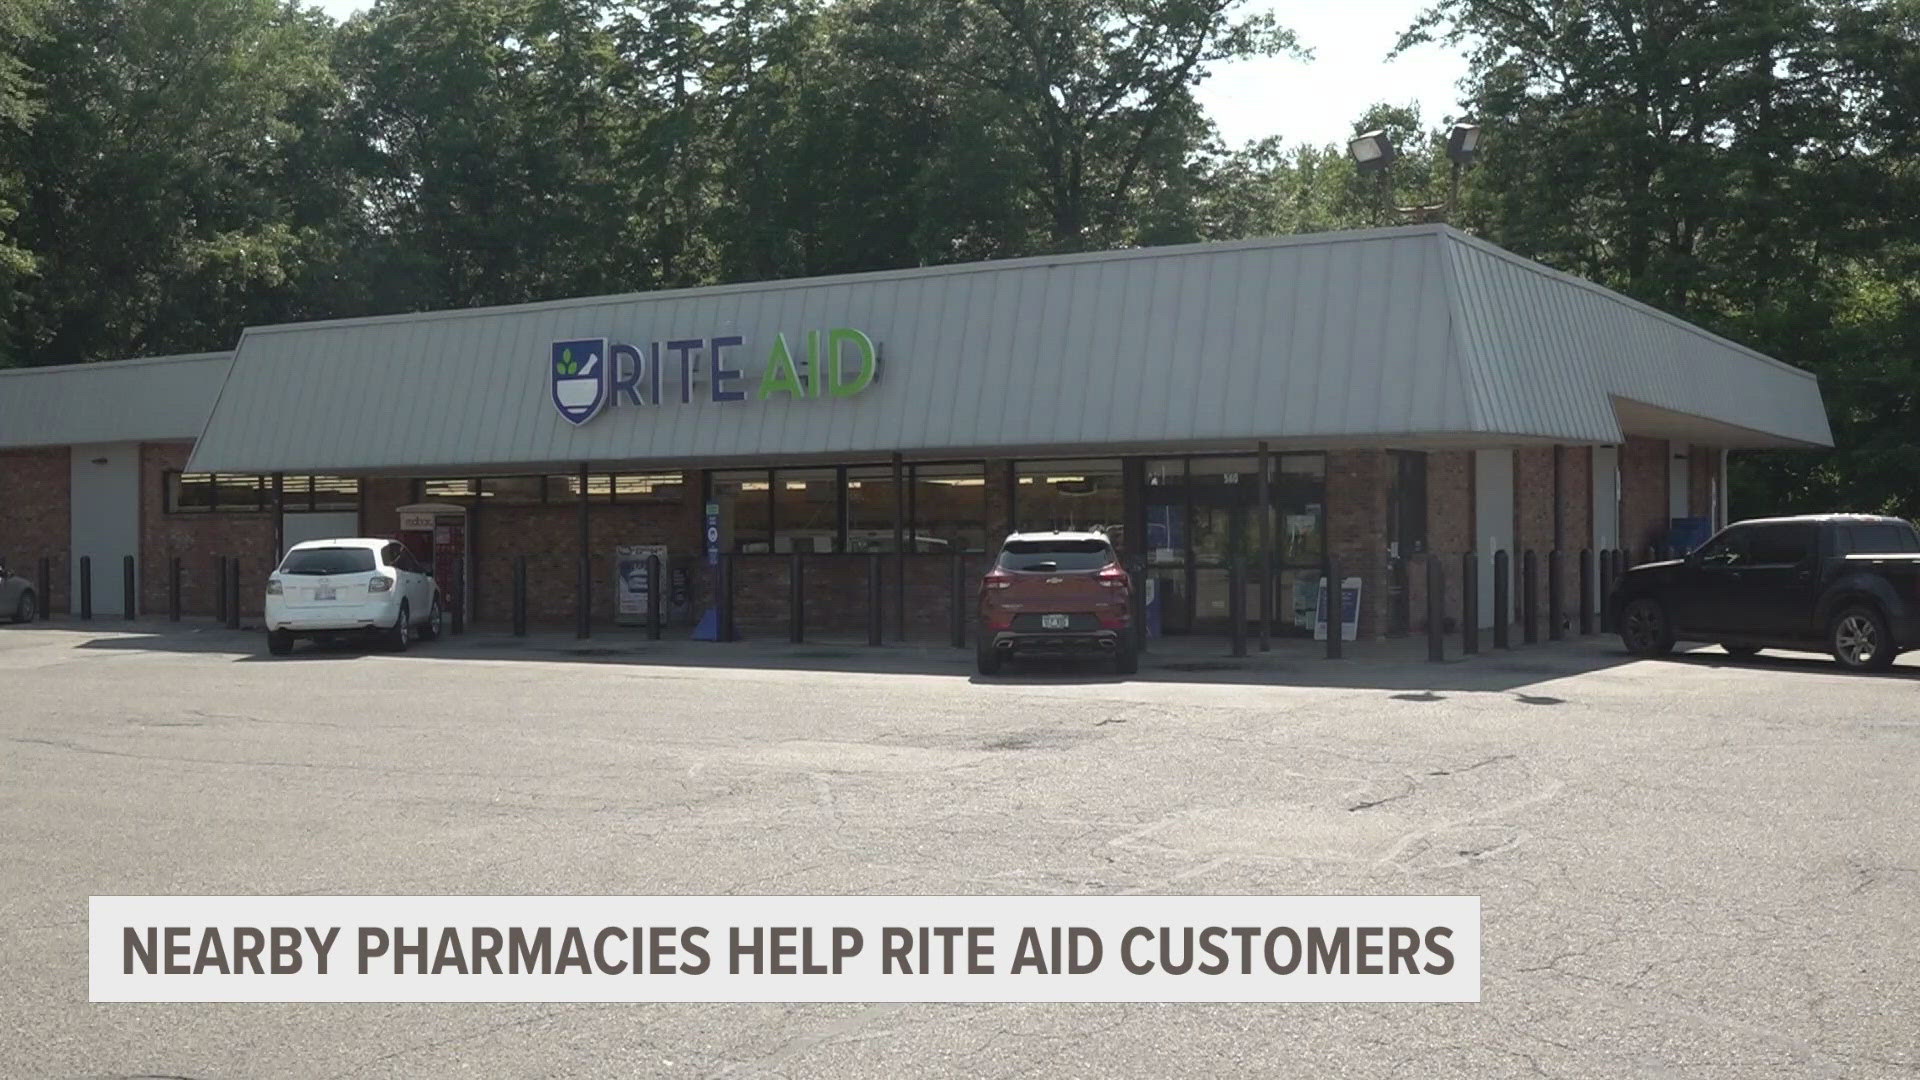 A Moore Family pharmacist said Rite Aid customers are coming in saying the Allegan store is closing and they need a new place to fill their prescriptions.